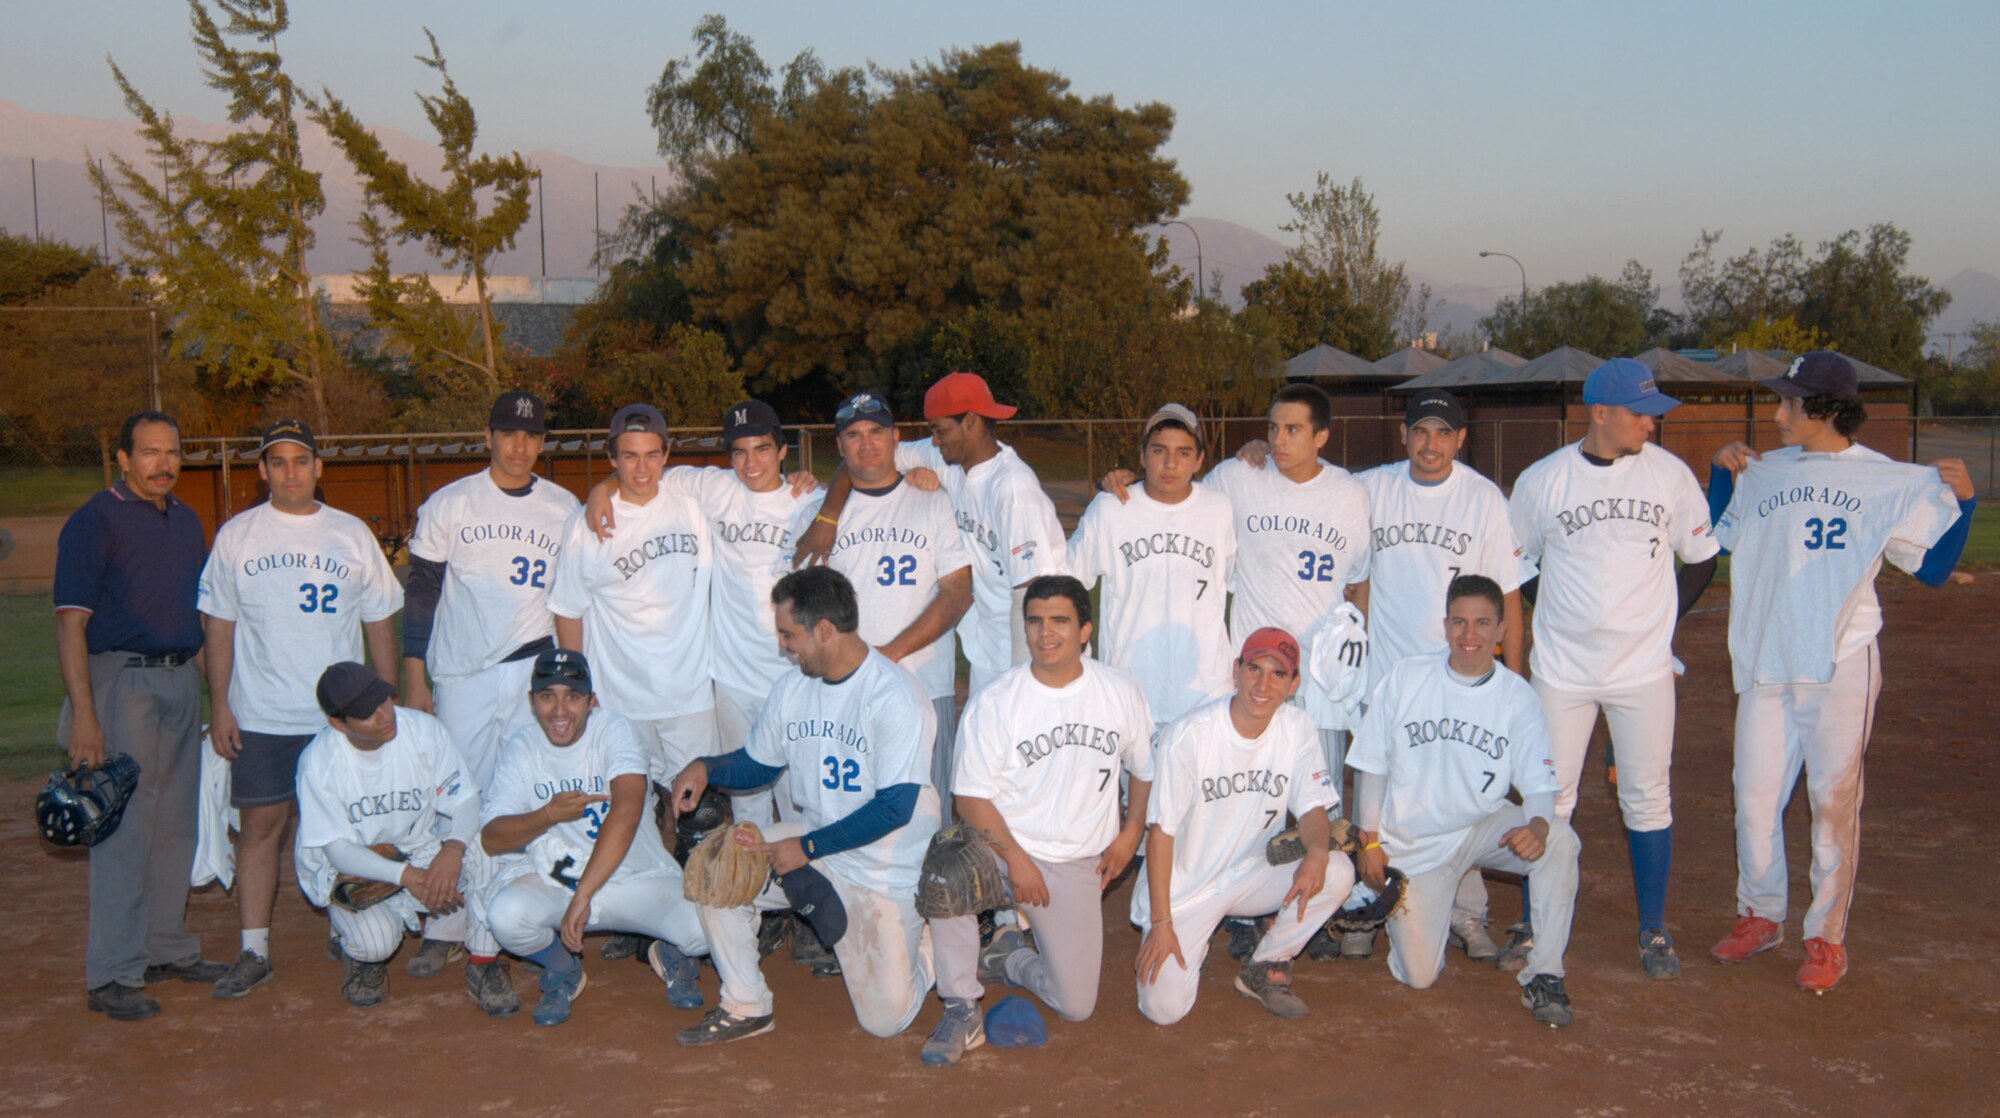 The Santiago Metros semi-pro baseball team poses proudly in their new Colorado Rockies tee shirts, after trouncing the visiting U.S. Airmen 8 to 5 in a friendly display of baseball diplomacy. Airmen stationed at Davis-Monthan Air Force Base and 12th Air Force (Air Forces Southern) worked with the Rockies to get donations of tee shirts, backpacks and hats for not only the Chilean team but the local children in Santiago. The Airmen were taking part in FIDAE 2008, one of the largest air and trade shows. (U.S. Air Force photo/Master Sgt. Jason Tudor).